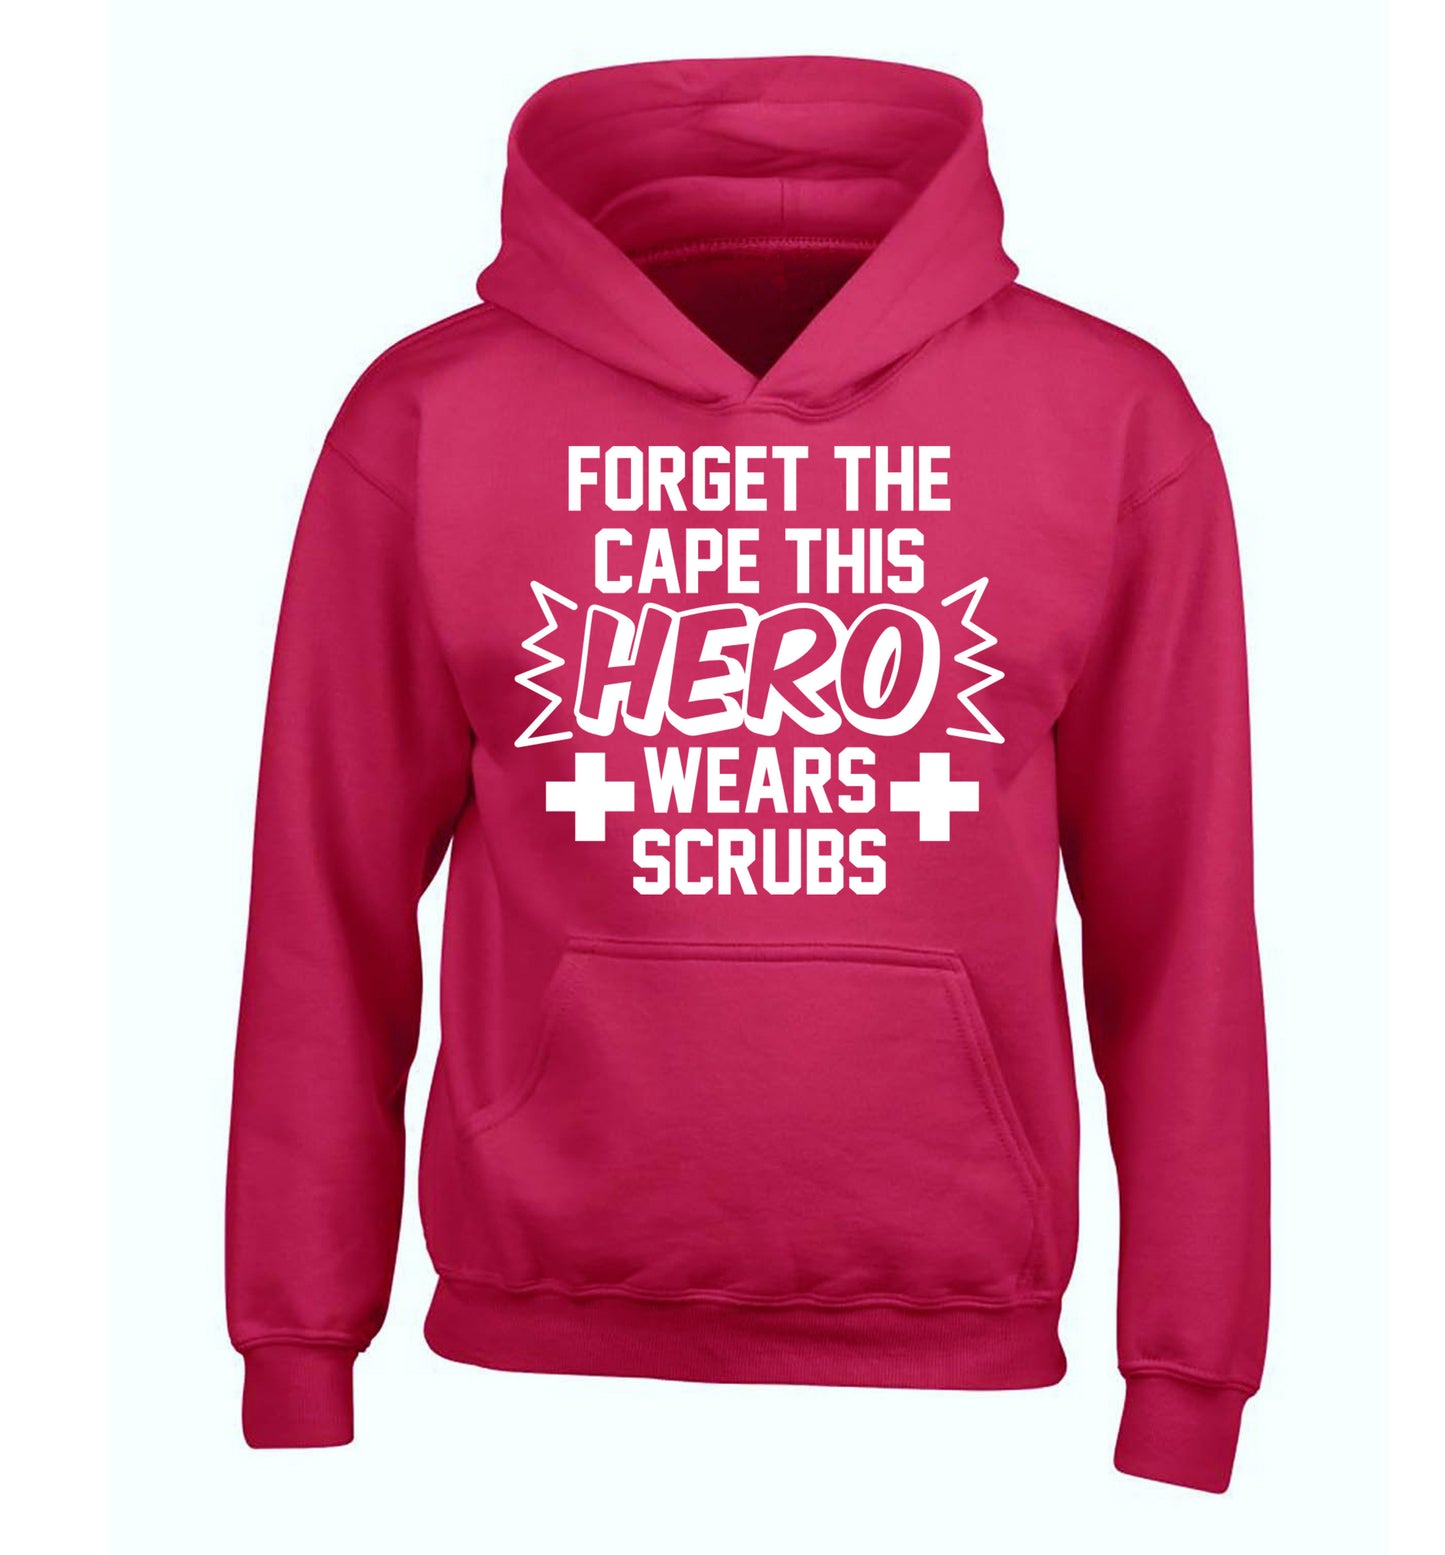 Forget the cape this hero wears scrubs children's pink hoodie 12-14 Years